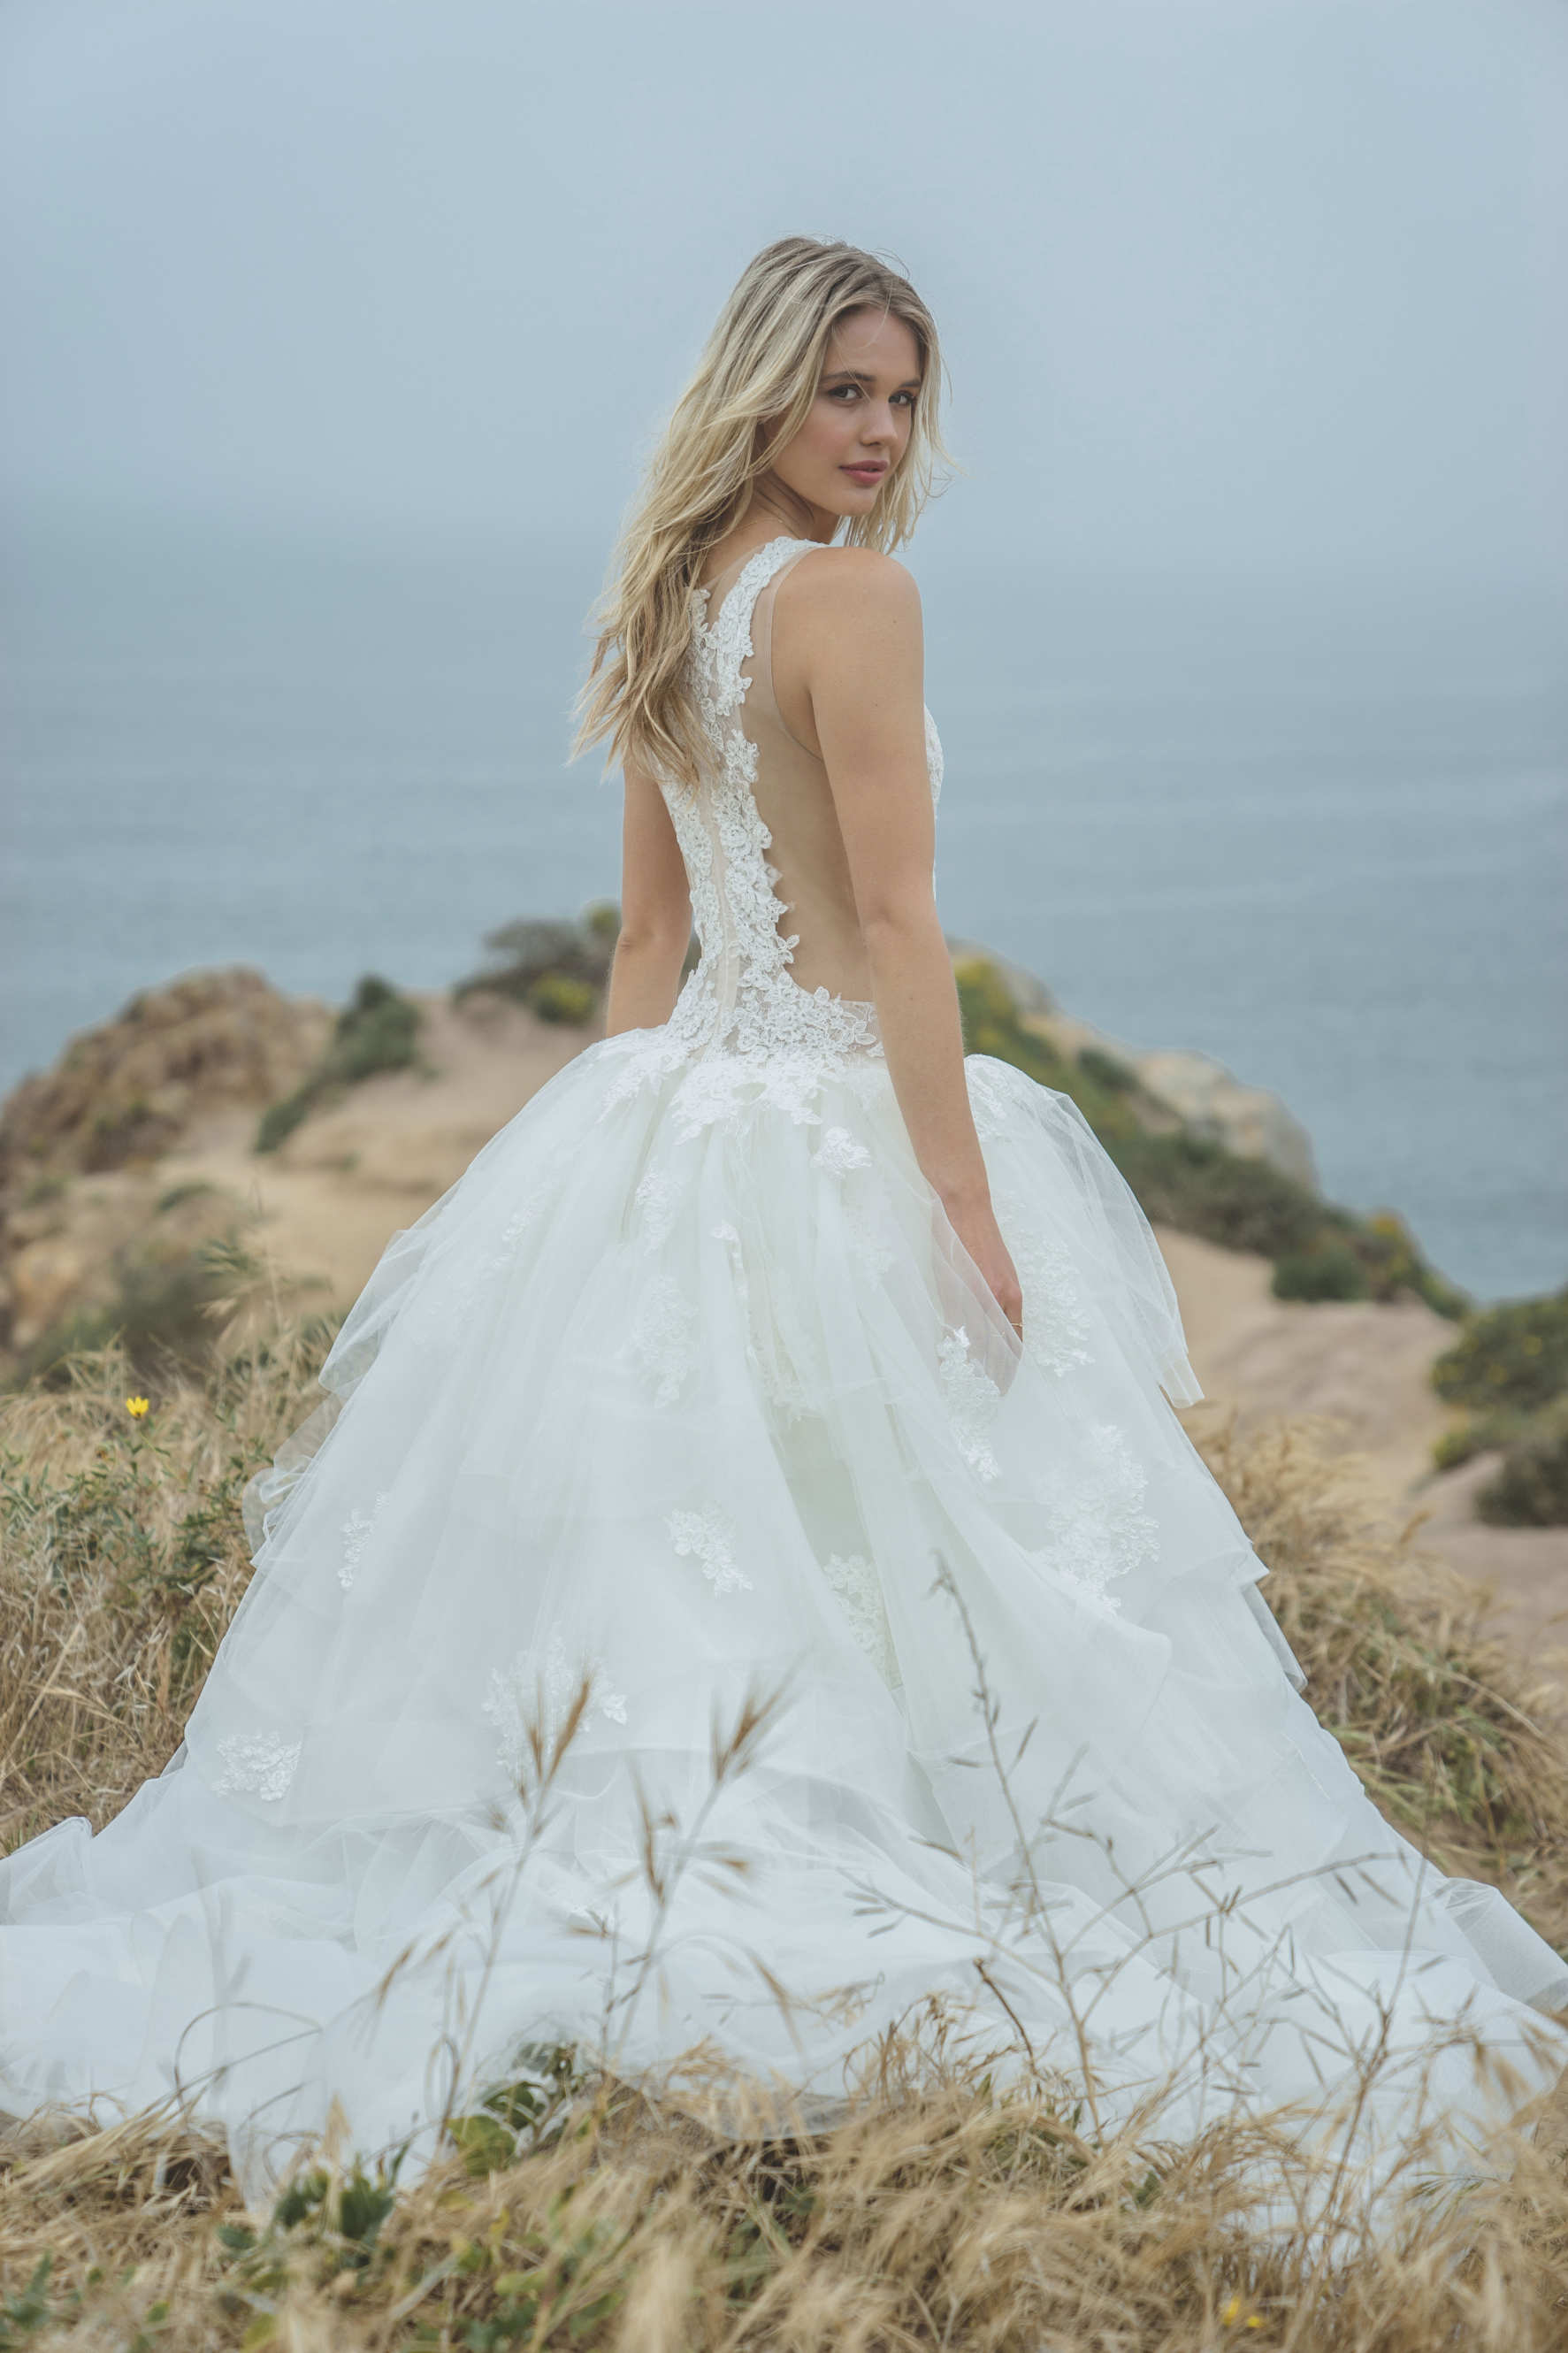 Top 10 Wedding Gown Trends from the 2018 NYC Bridal Fashion Week: Hits and Misses and Wedding Gown Inspiration